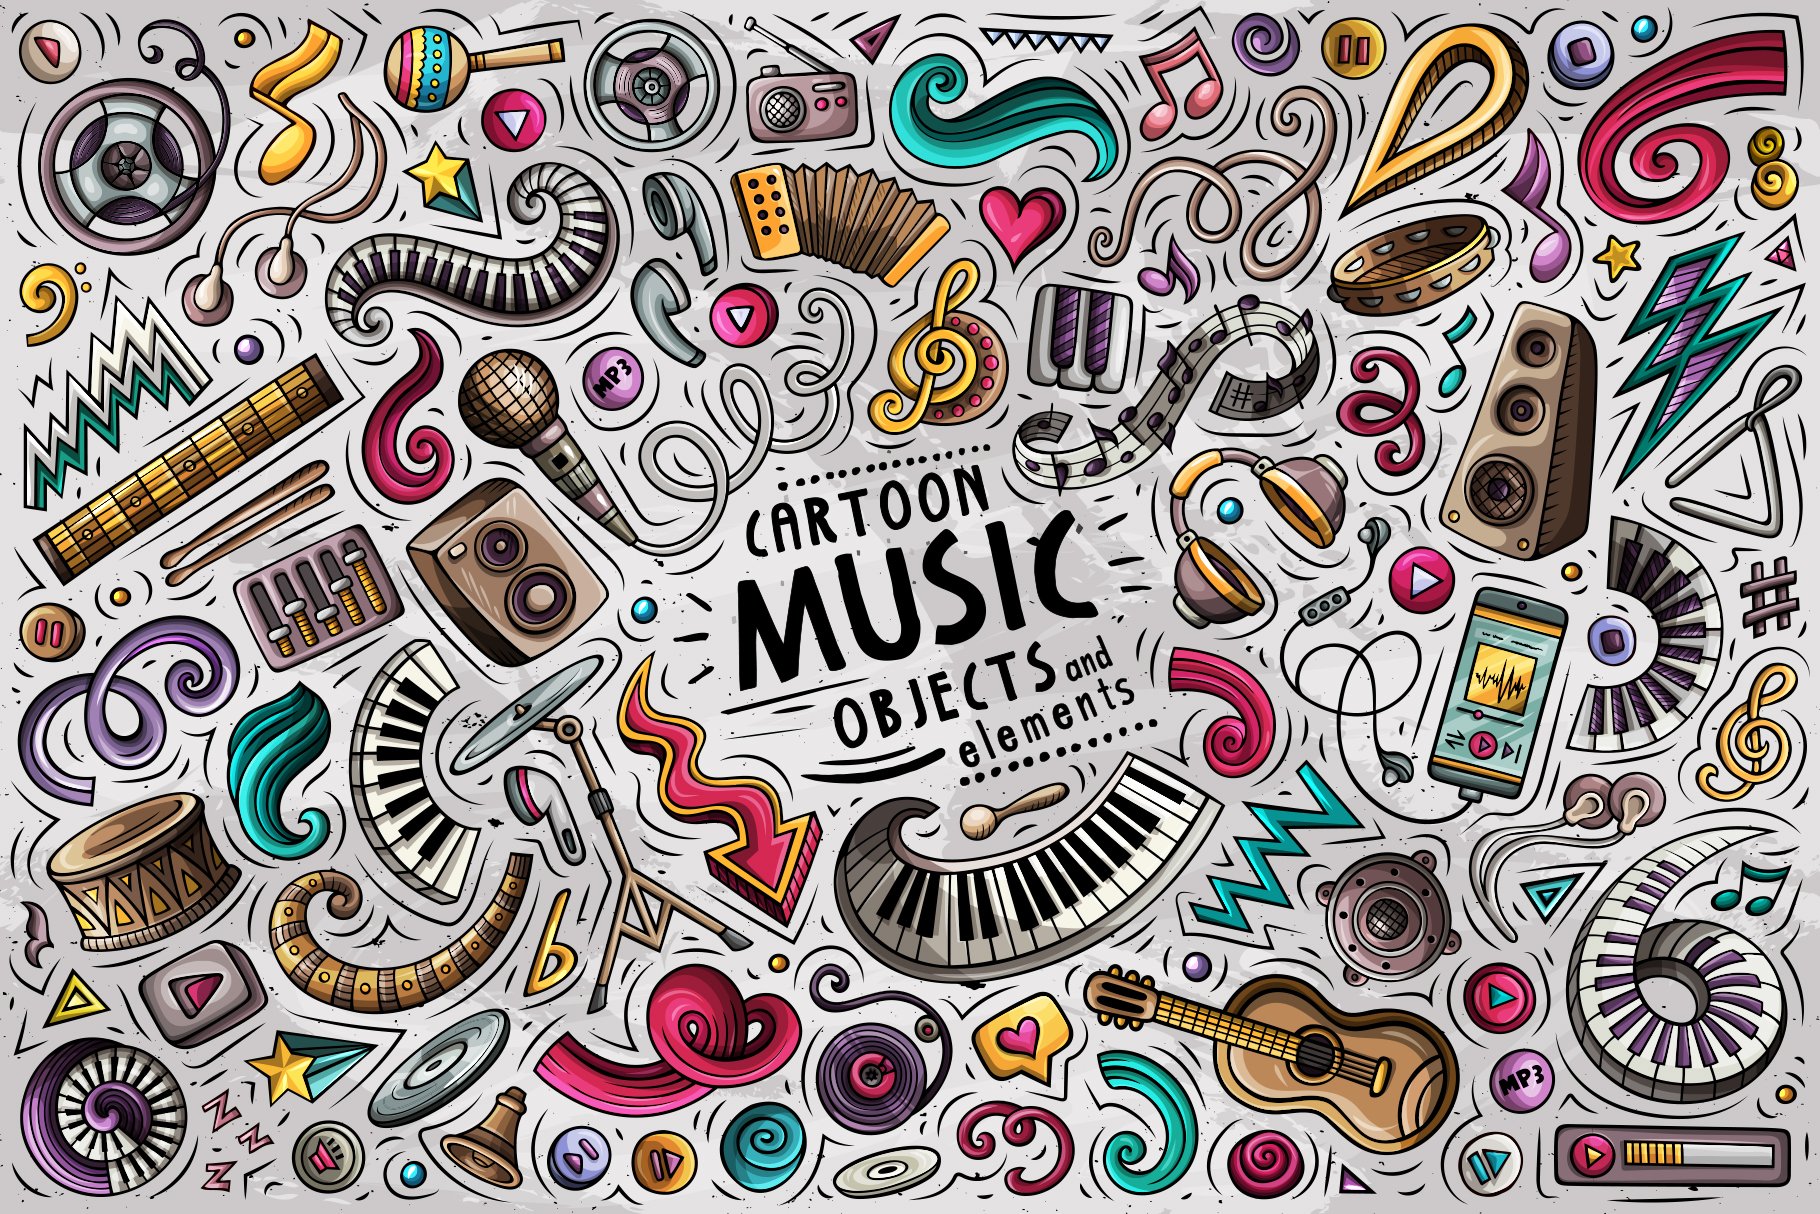 Music Cartoon Objects Set cover image.